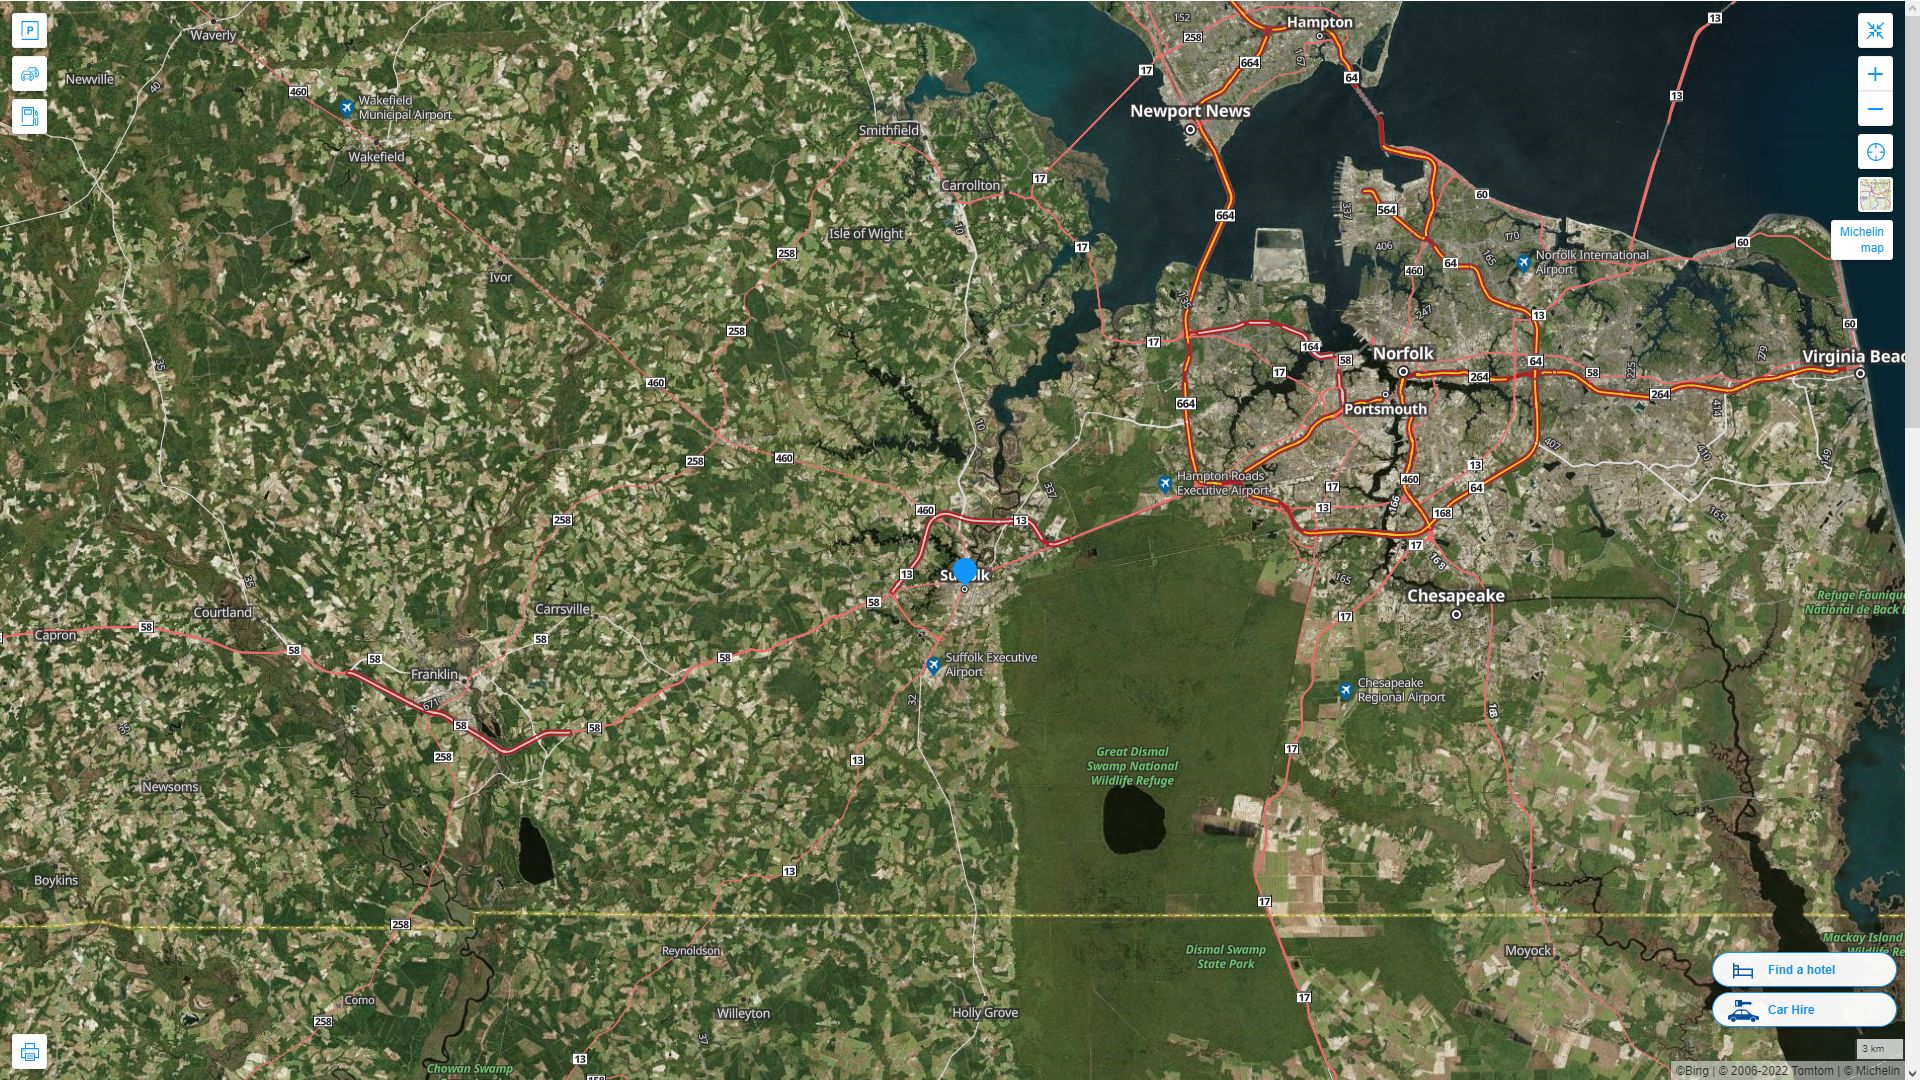 Suffolk Virginia Highway and Road Map with Satellite View